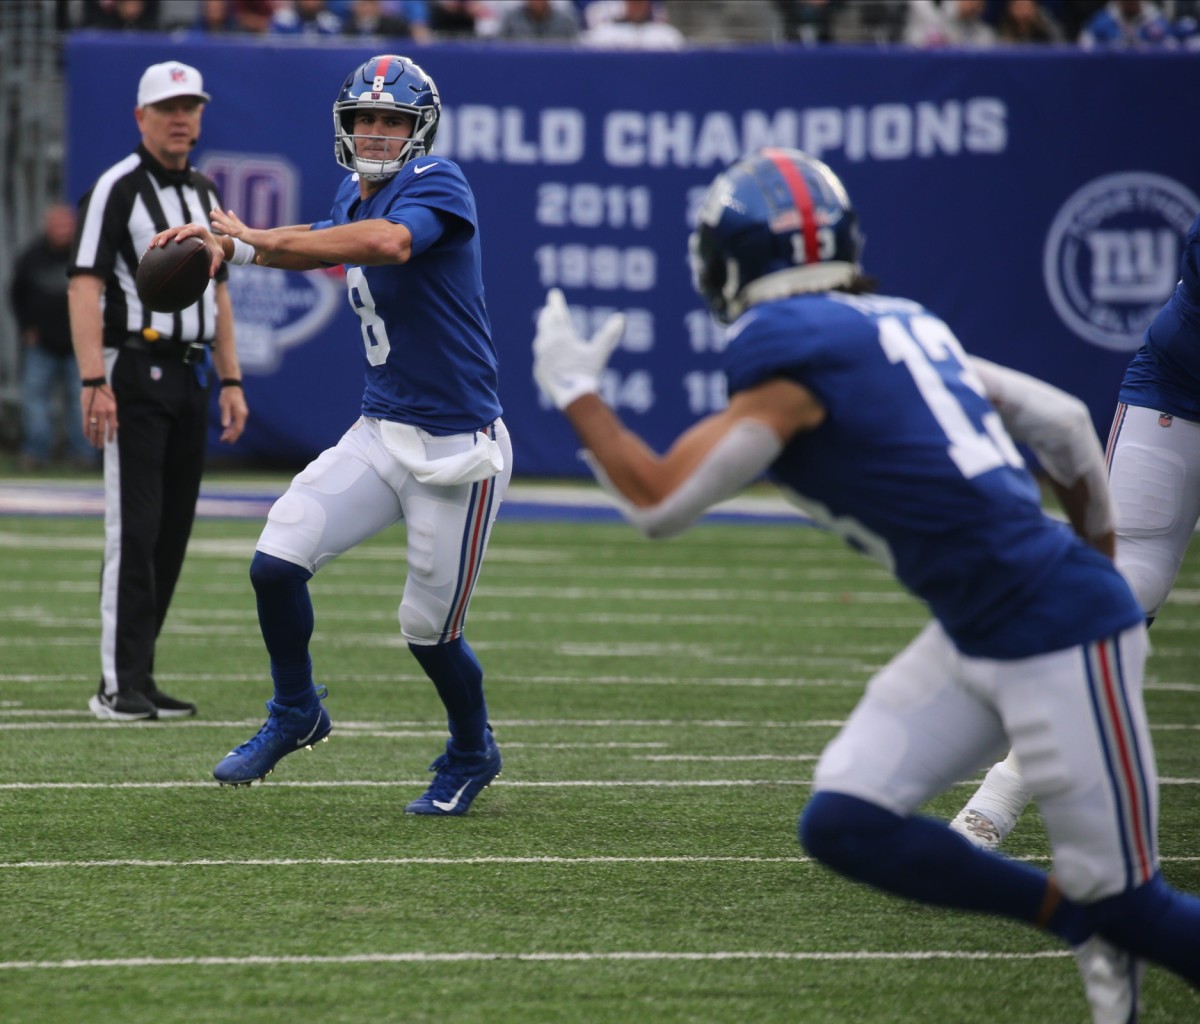 Giants quarterback Daniel Jones passes to Dante Pettis of the Giants in the second half as the Carolina Panthers faced the New York Giants at MetLife Stadium in East Rutherford, NJ on October 24, 2021.